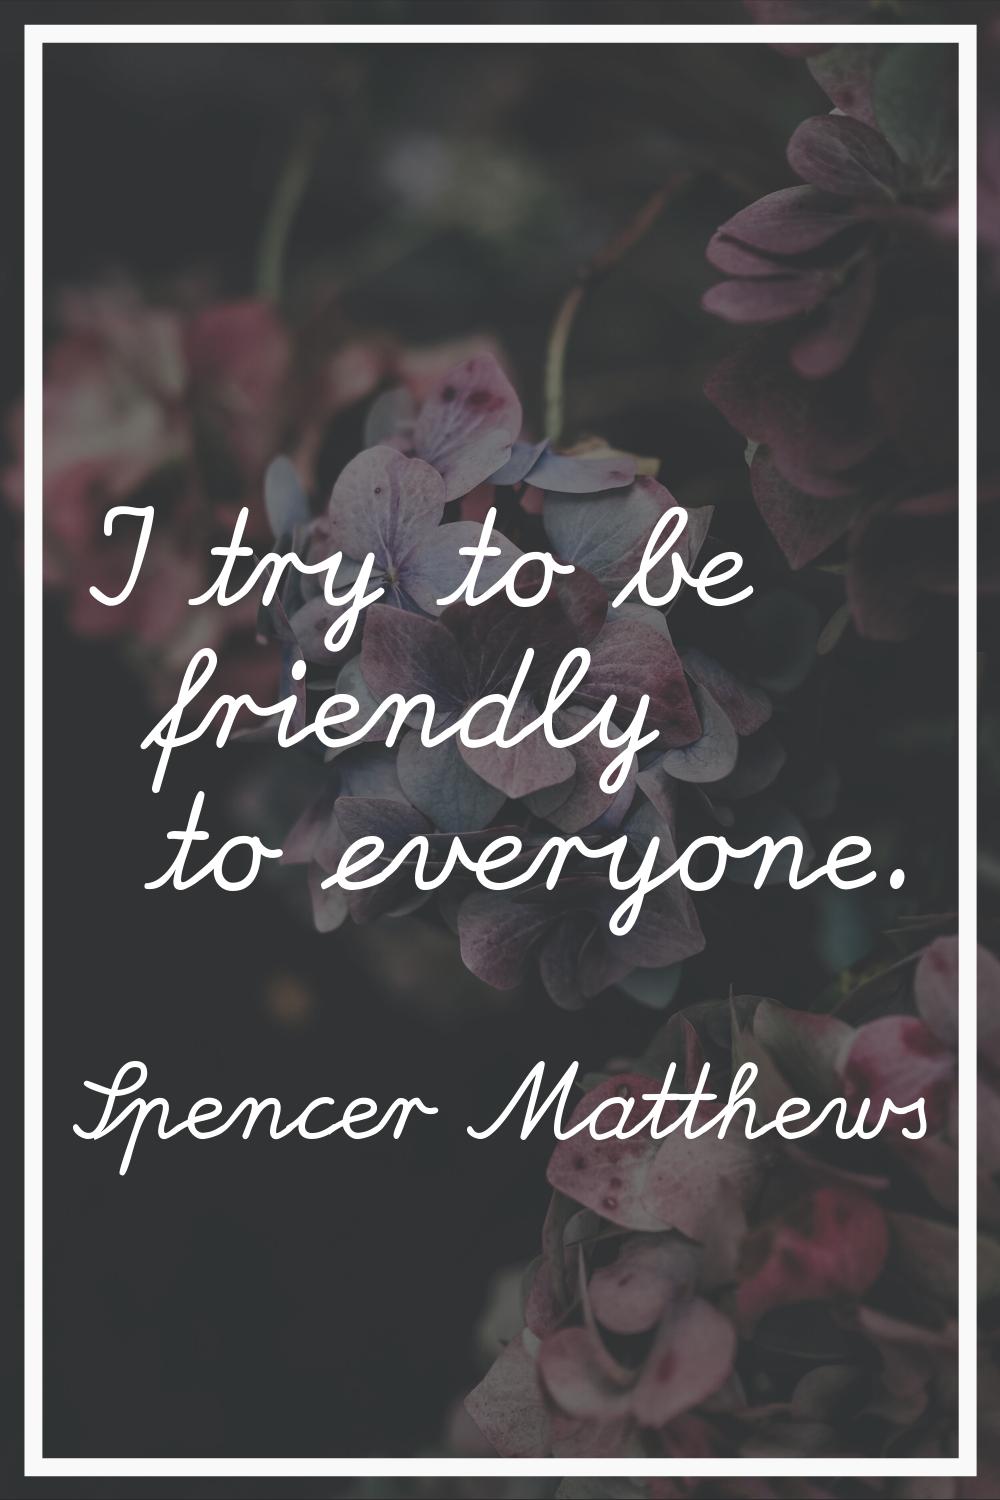 I try to be friendly to everyone.